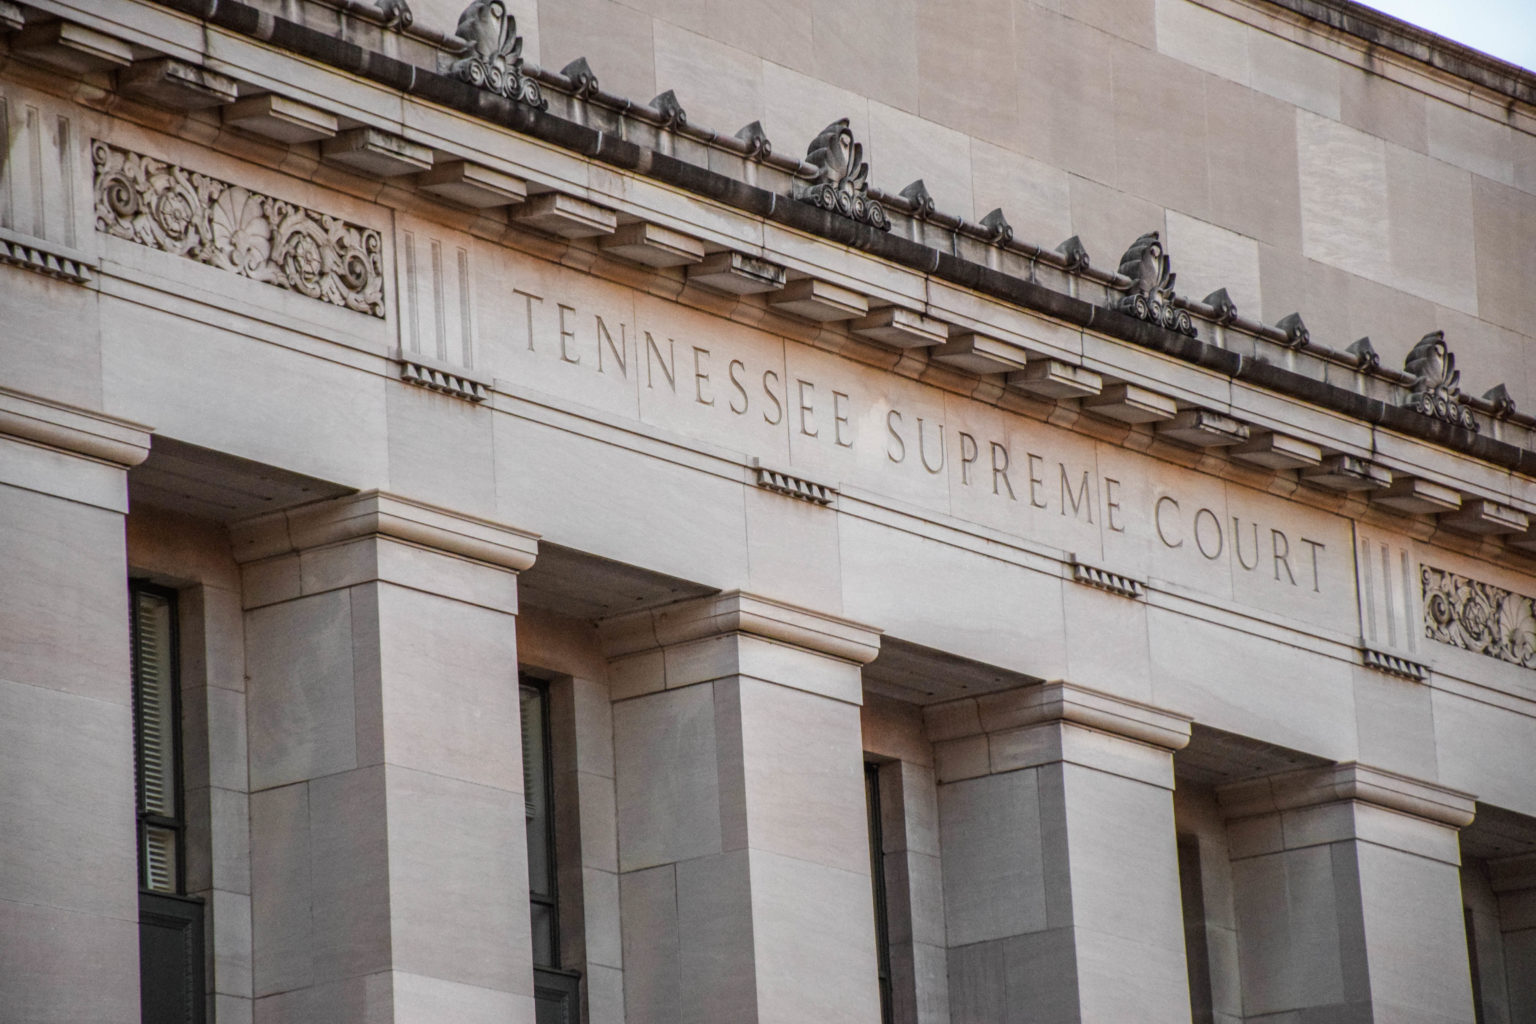 Meet the candidates vying for a seat on the Tennessee Supreme Court